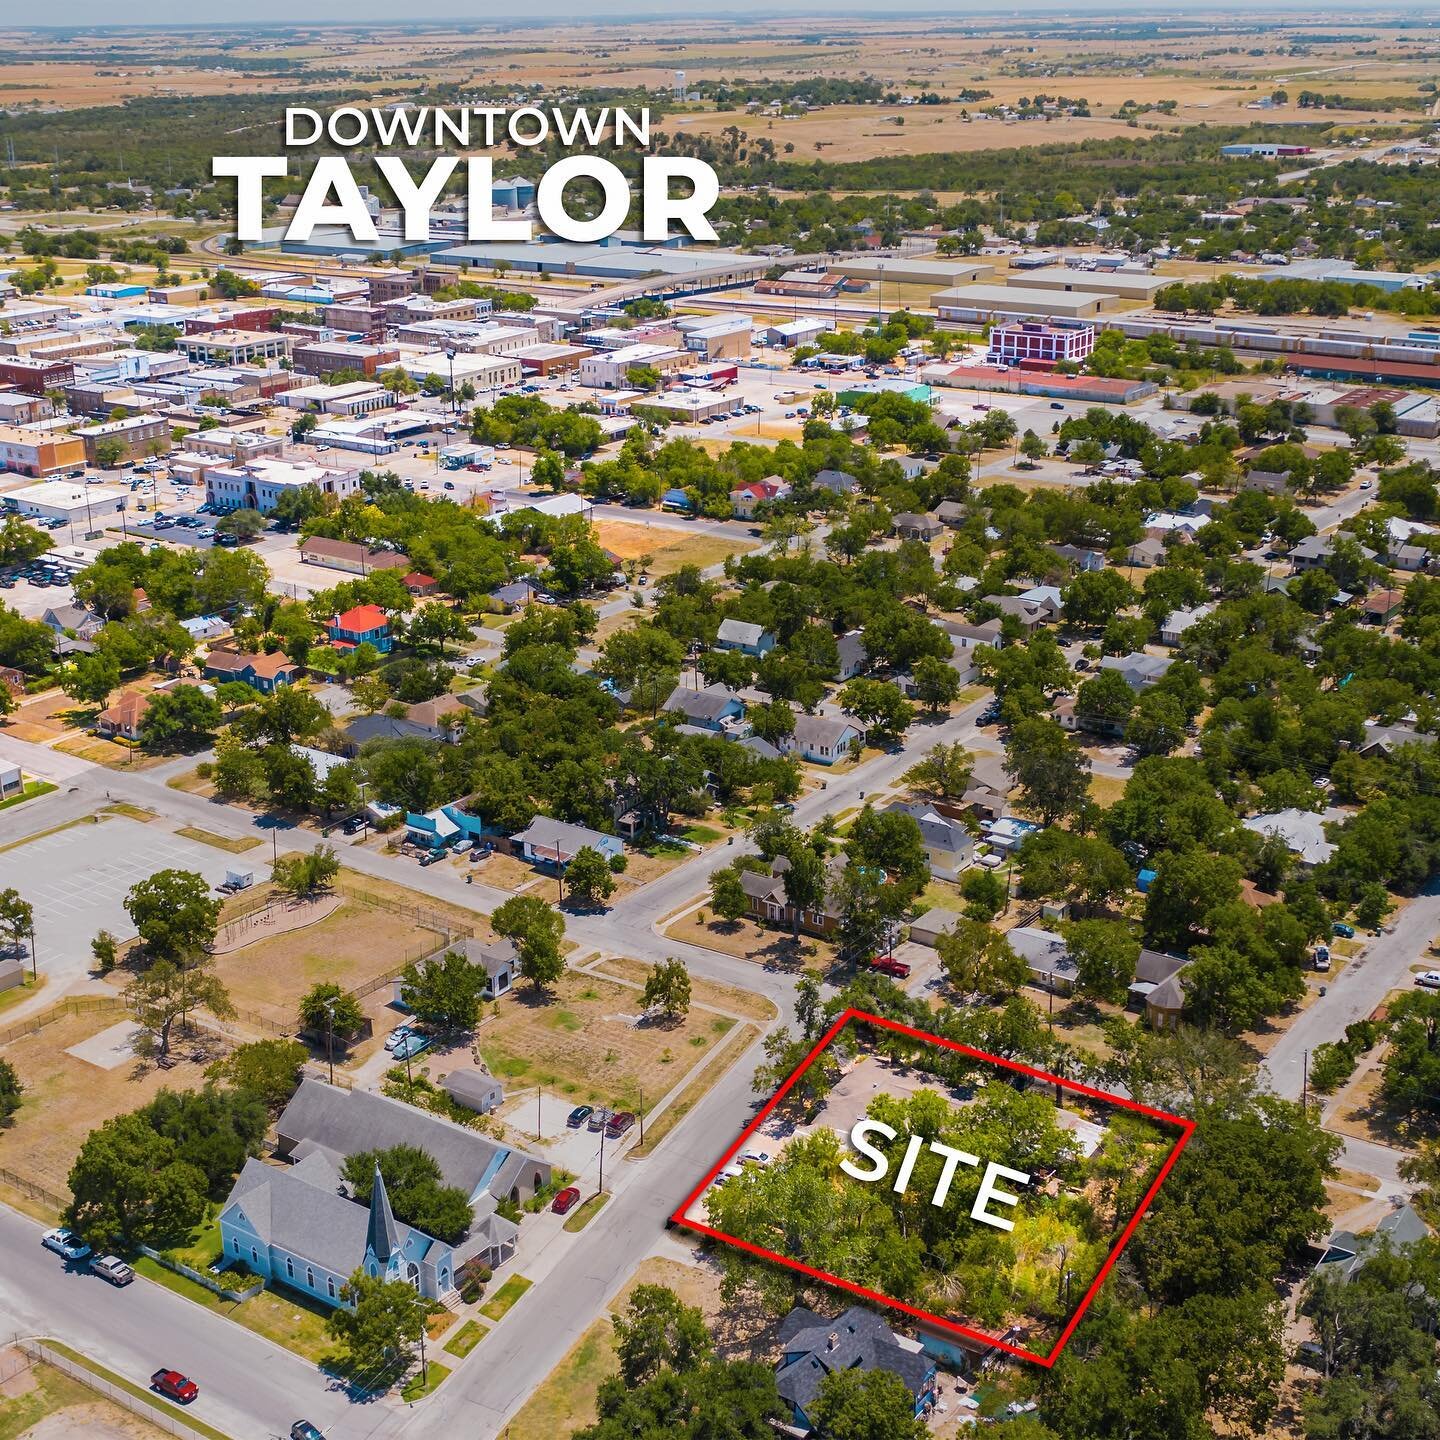 Let&rsquo;s talk Sixth and Davis in Taylor, Texas! 

Imagine... quite possibly the most desirable business location in the Historical destination of Taylor, Texas. With upcoming Samsung manufacturing facilities and massive residential infrastructures